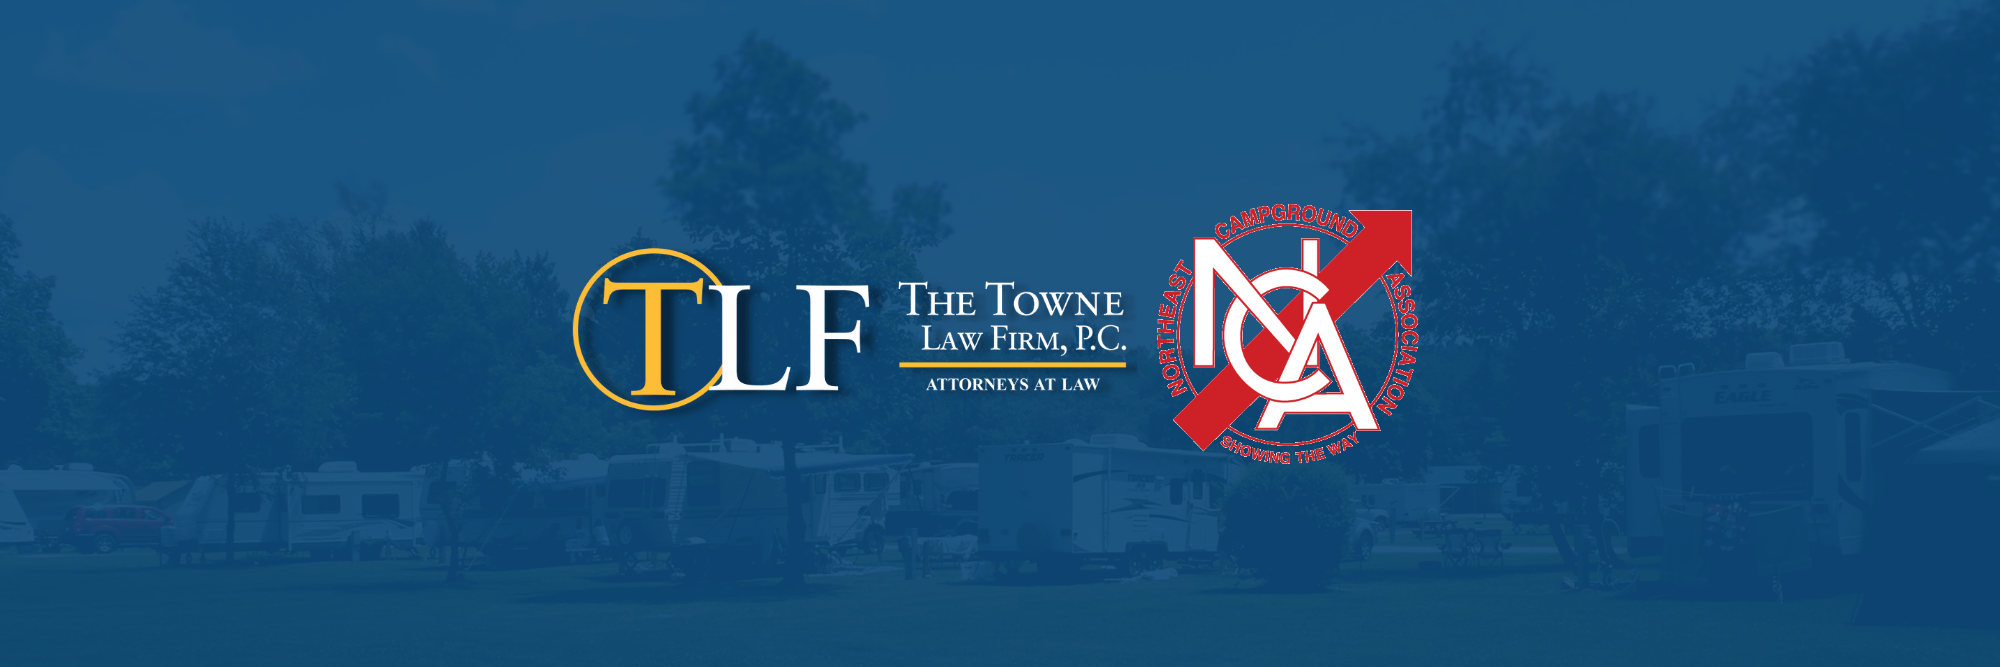 Blog Banner, RV Park with blue overlay and The Towne Law Firm logo and Northeast Campground Association Logo